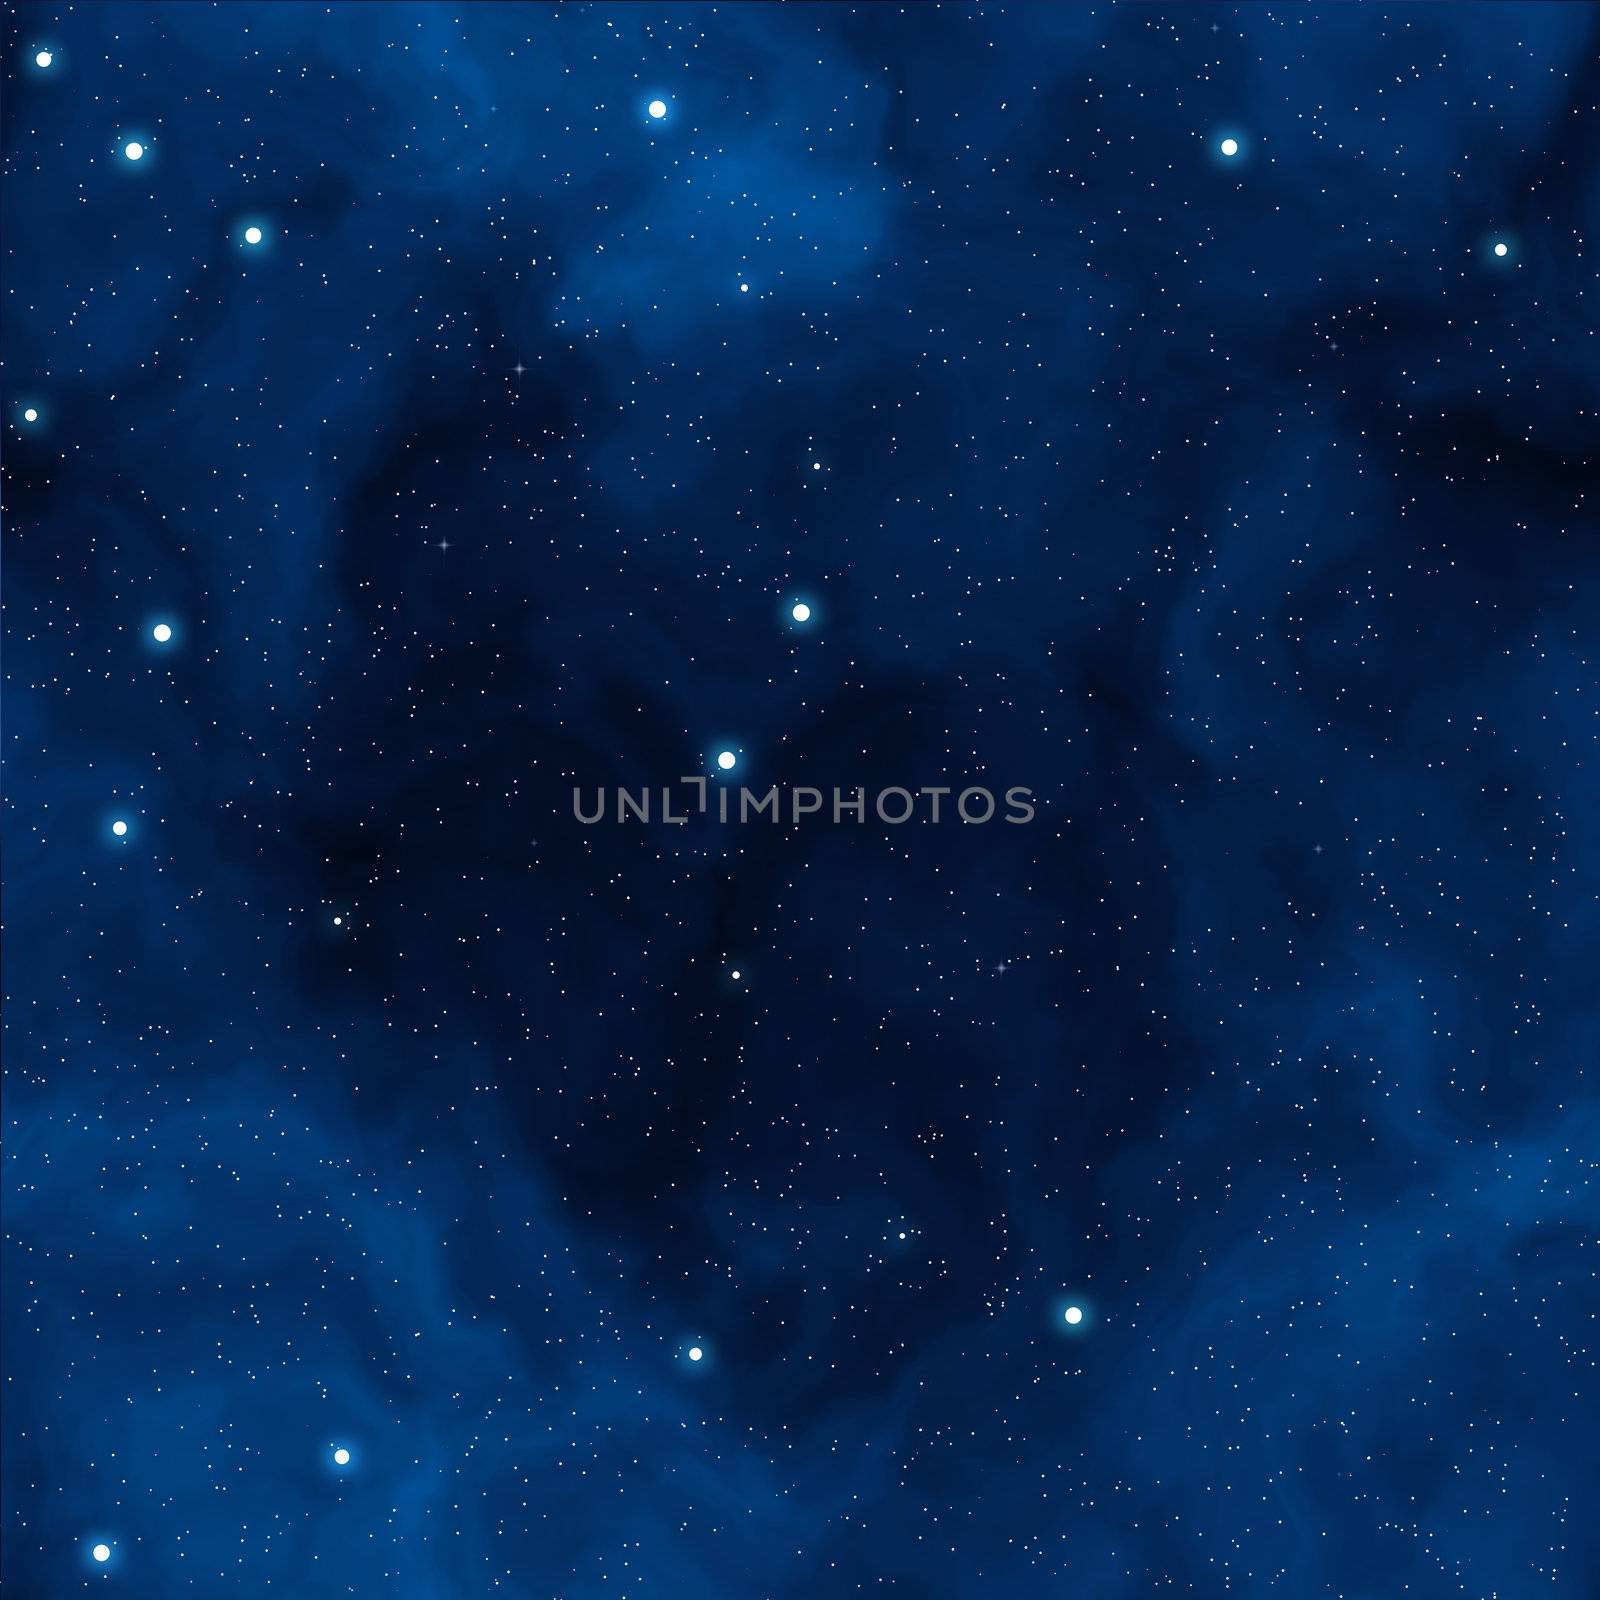 An image of a seamless star field